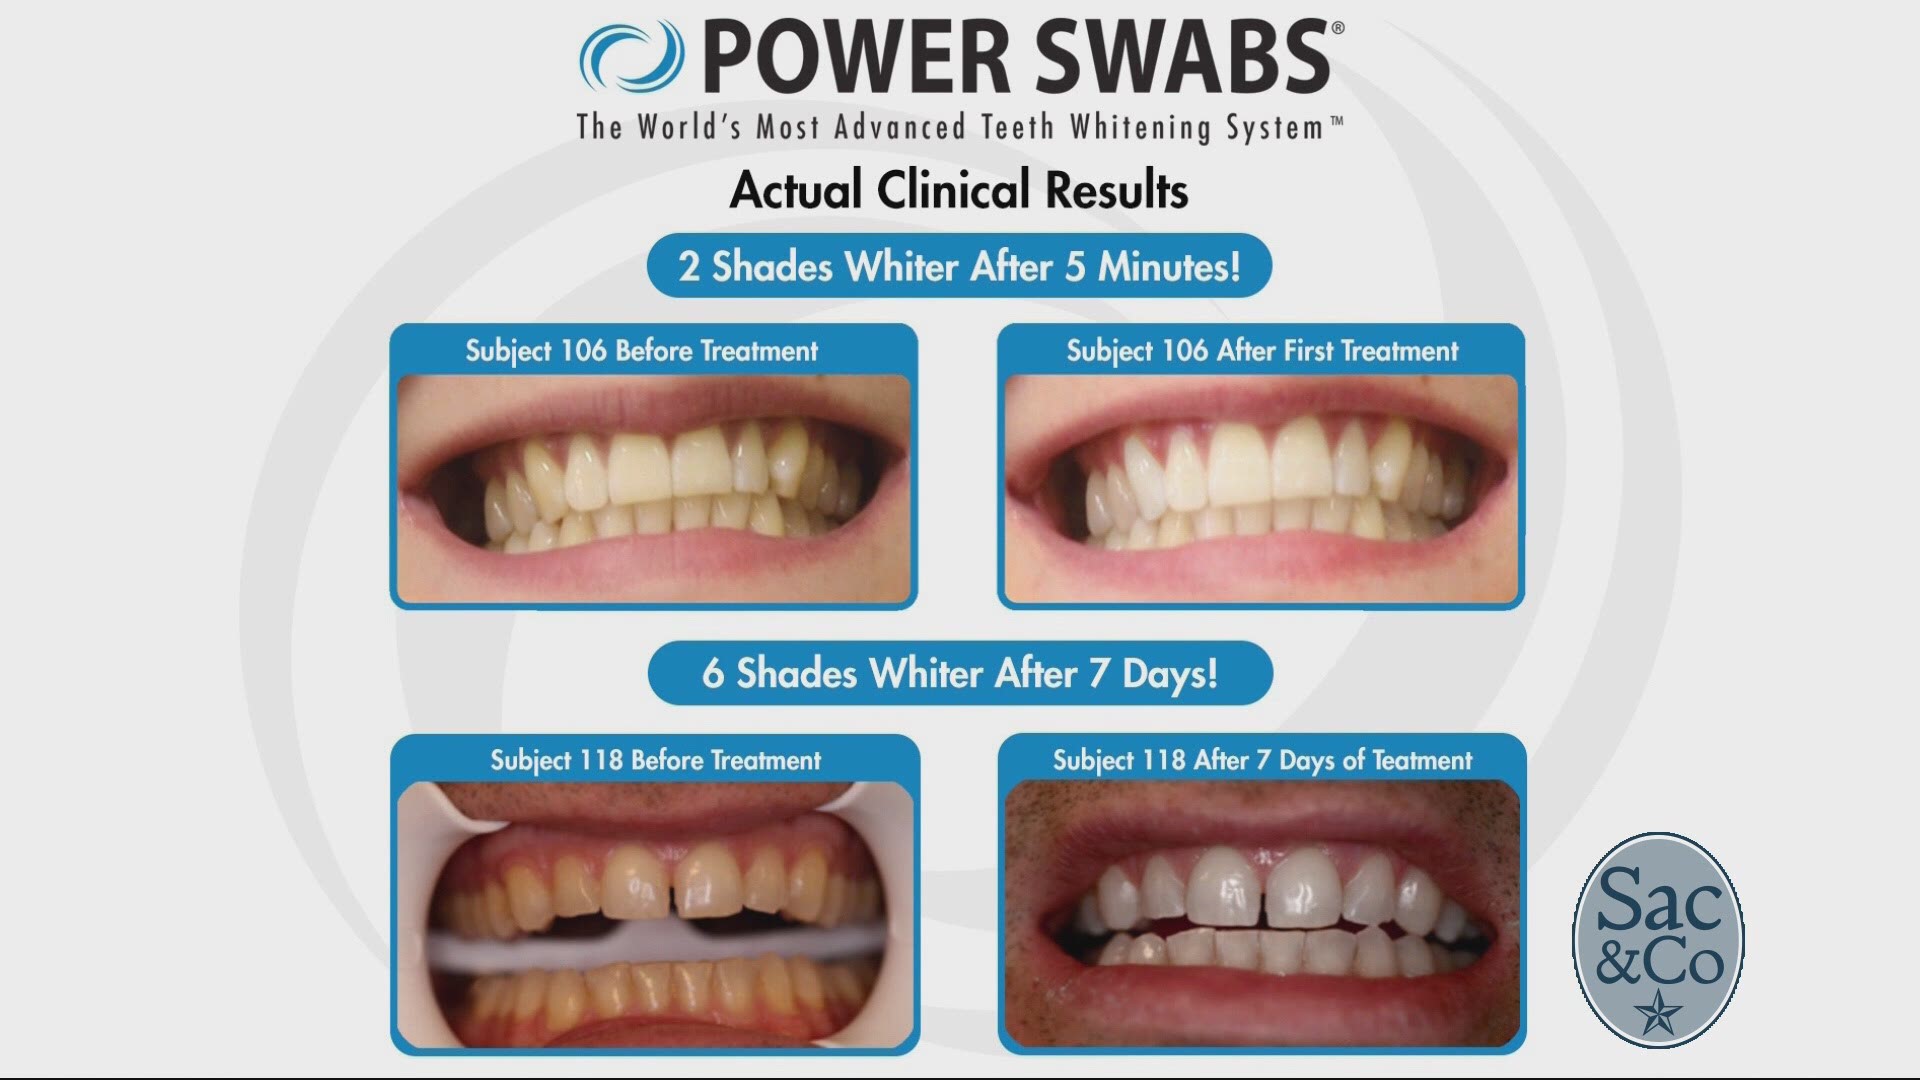 Learn how Power Swabs can help you get a whiter, brighter smile in minutes! The following is a paid segment sponsored by True Earth Health Solutions.